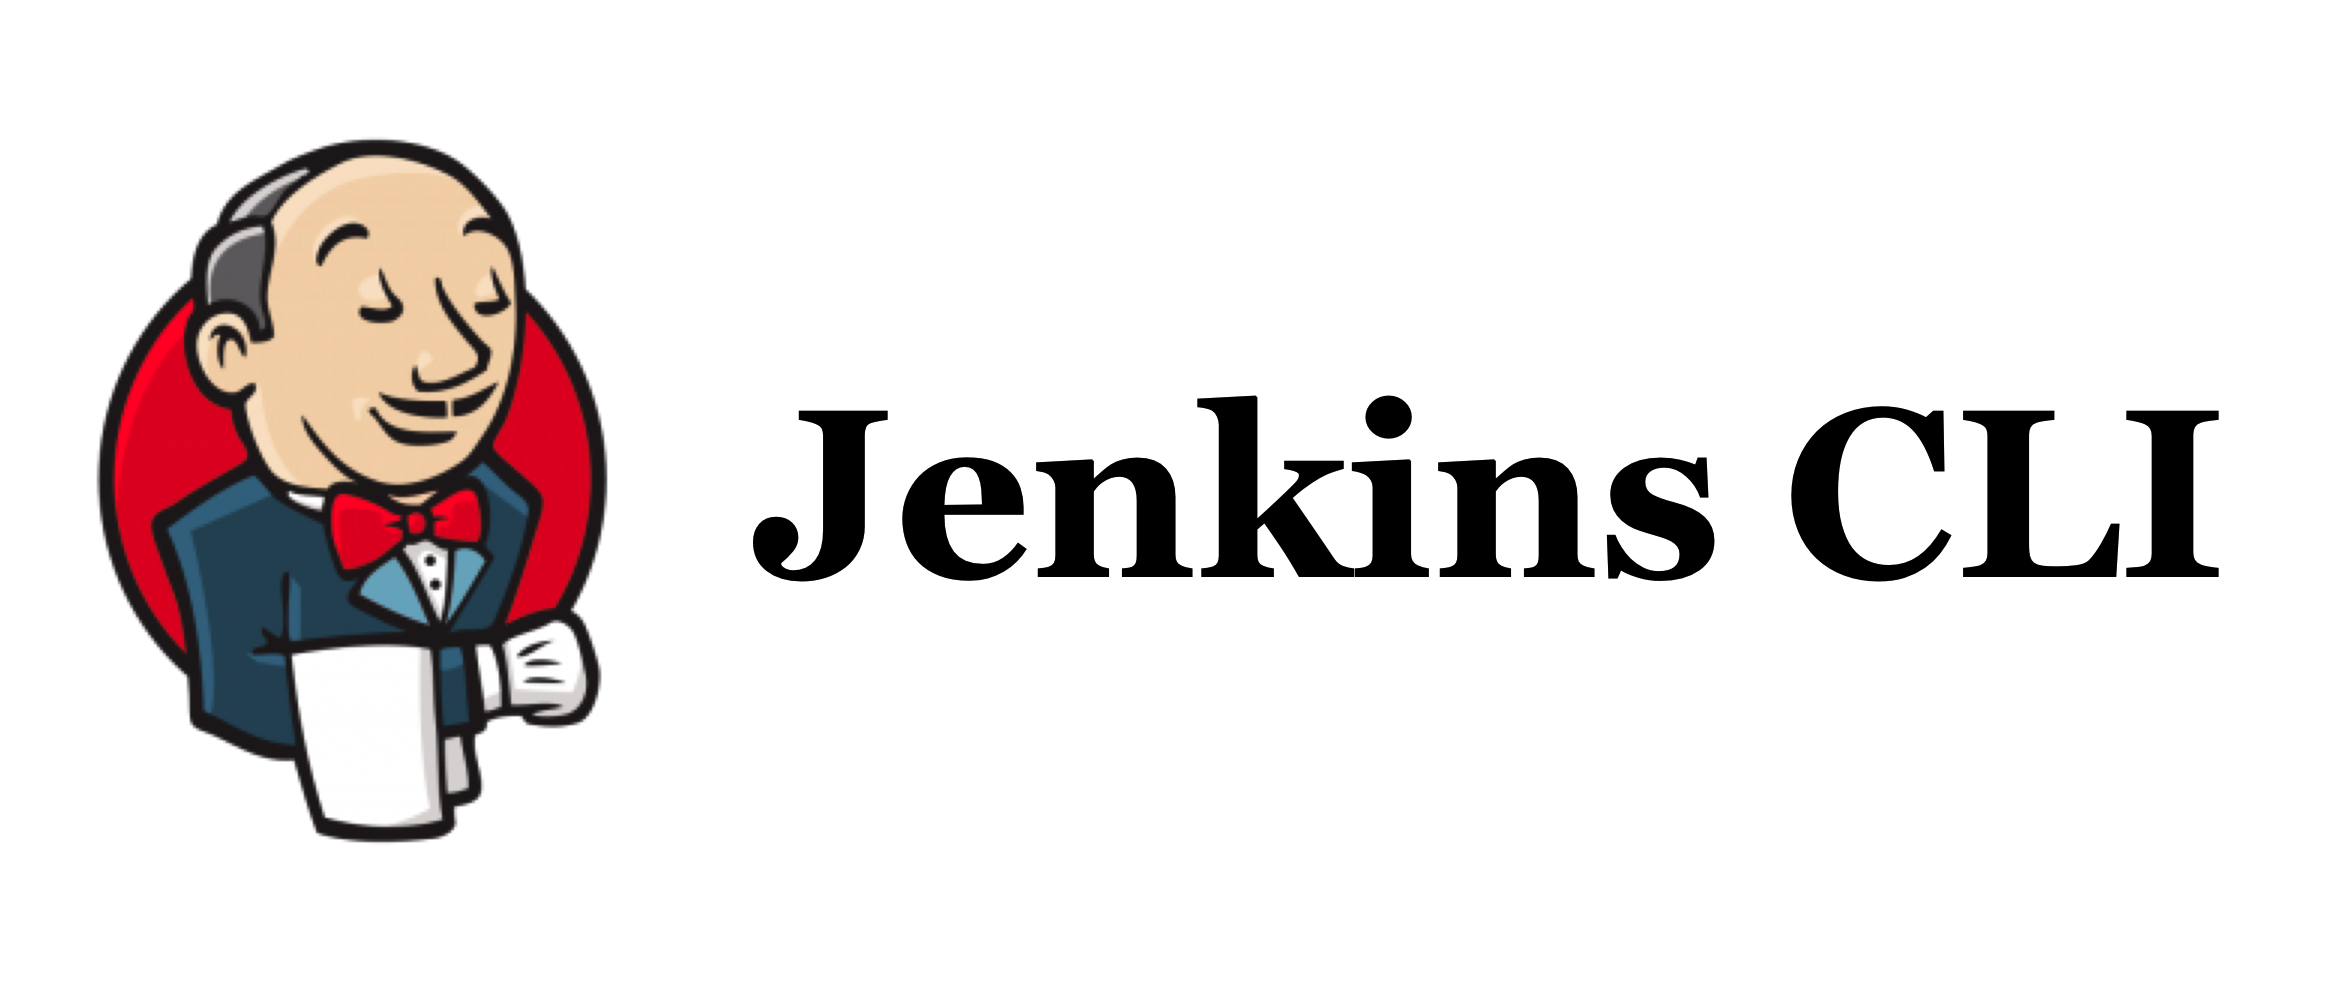 wechat/articles/2019/11/2019-11-20-jenkins-cli-help-you-manage-jenkins/jenkins-cli.png